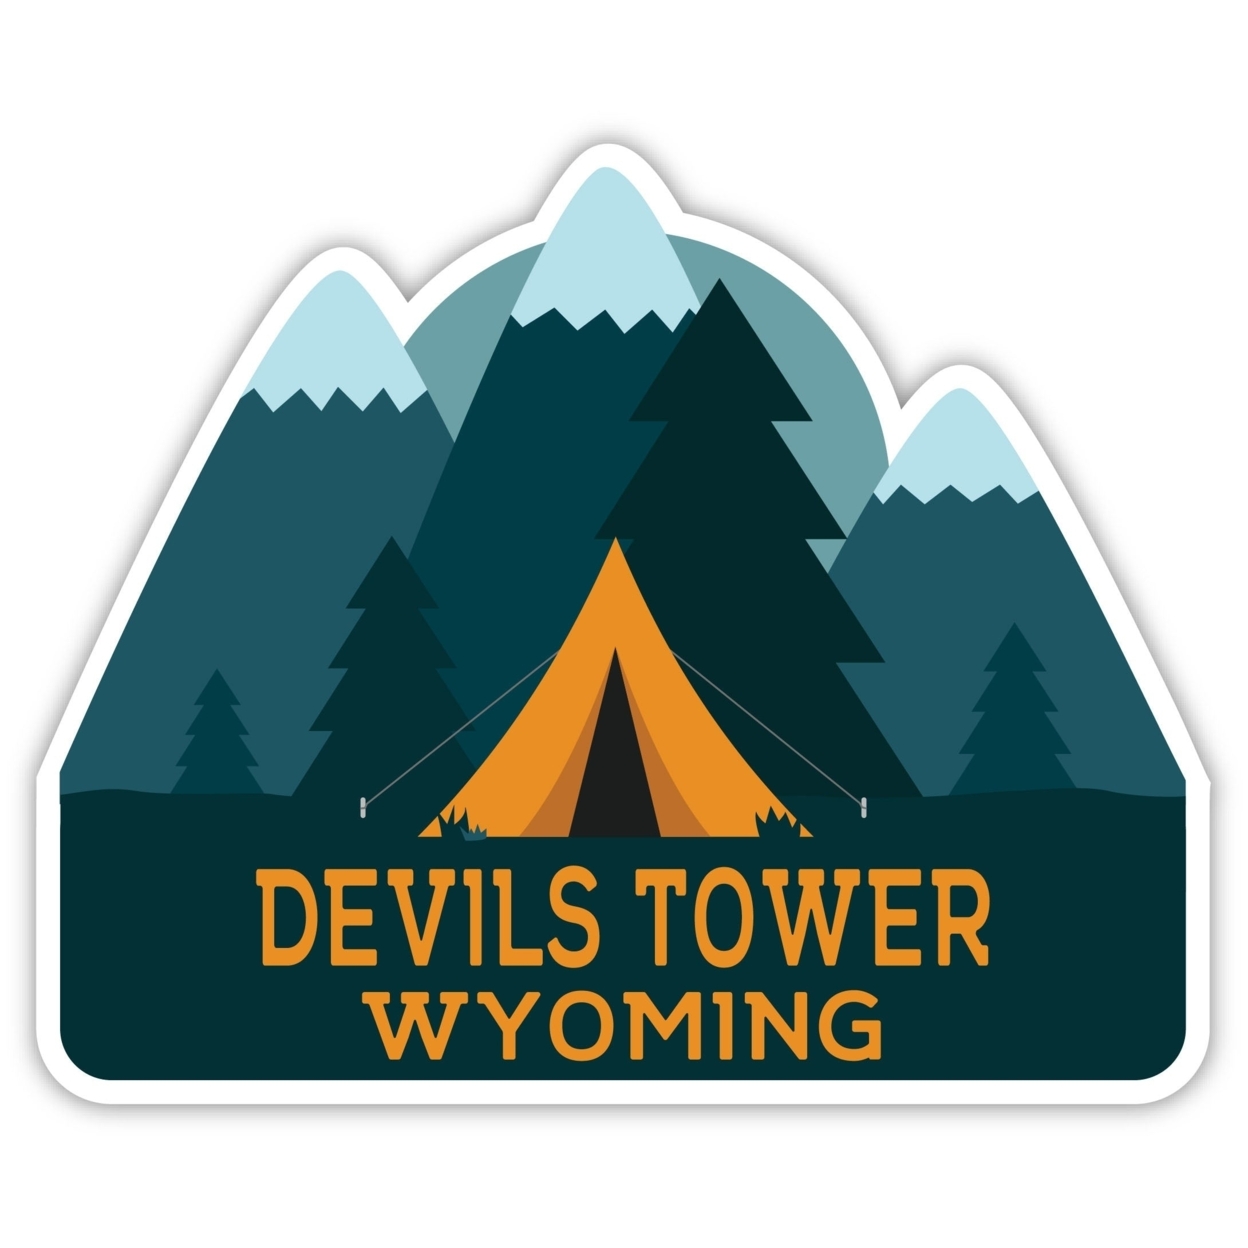 Devils Tower Wyoming Souvenir Decorative Stickers (Choose Theme And Size) - Single Unit, 2-Inch, Great Outdoors